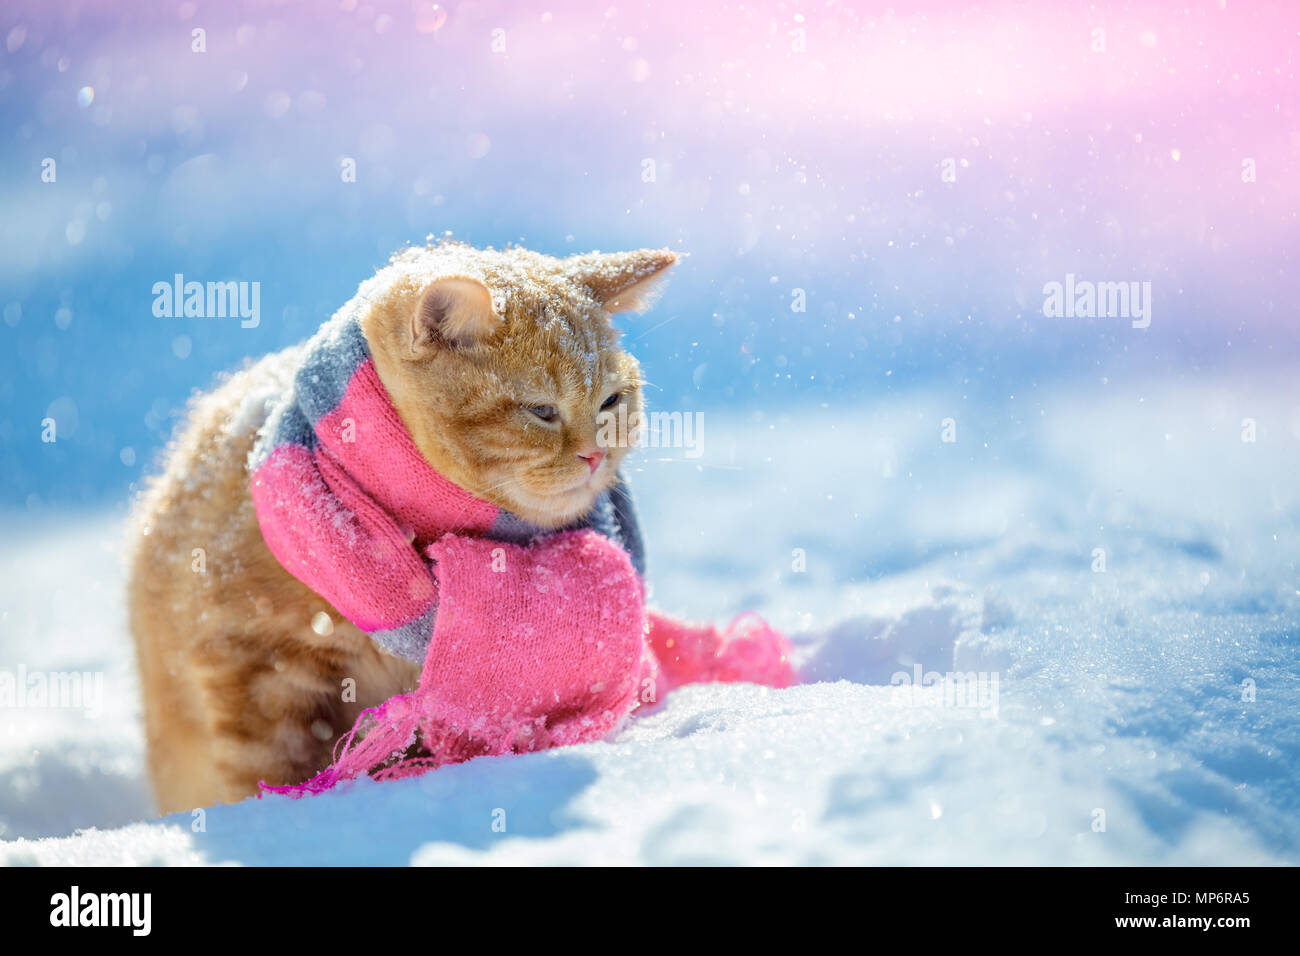 Portrait of a little red kitten wearing knitted scarf outdoors in winter Stock Photo